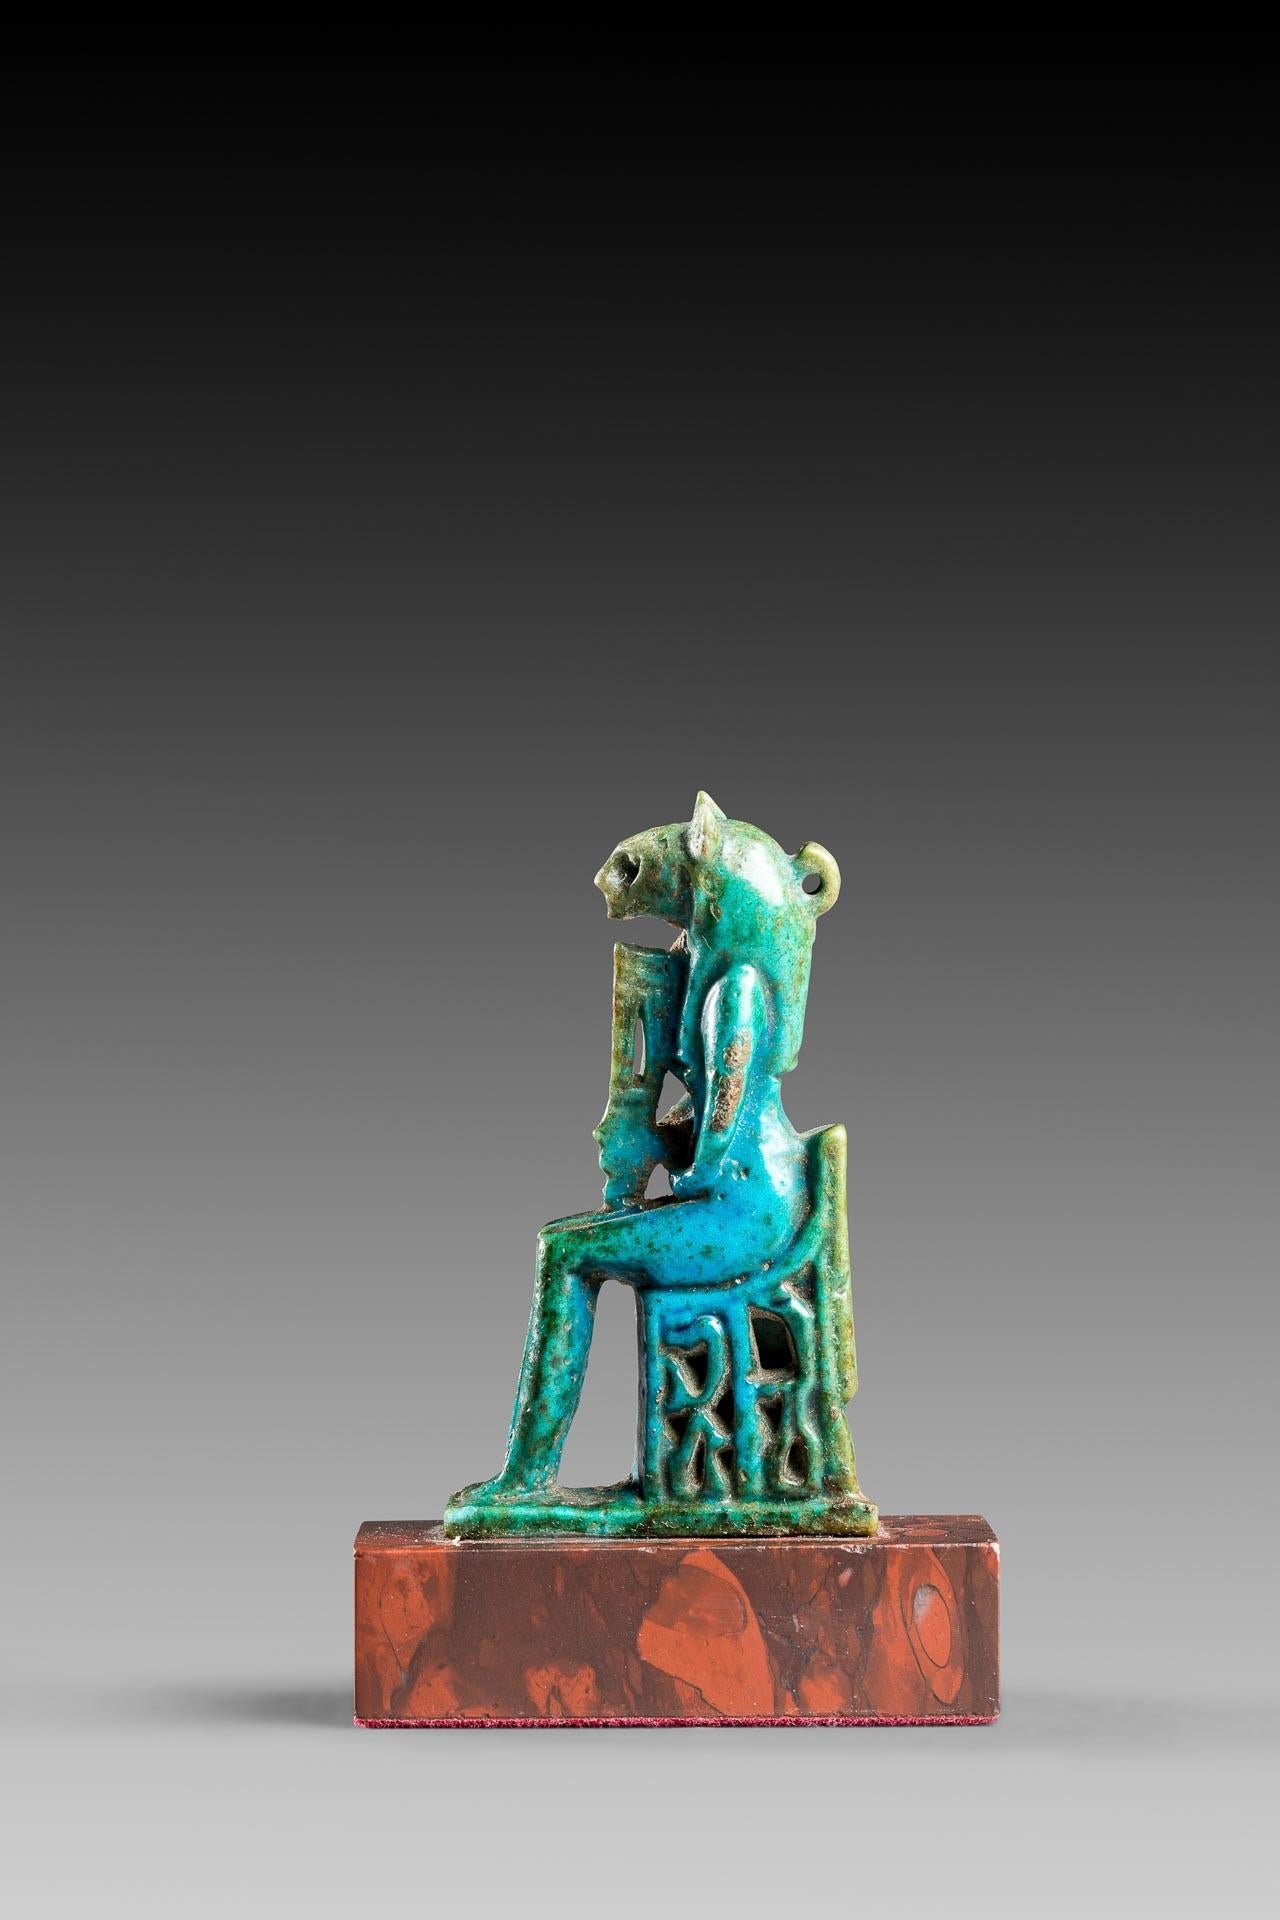 Turquoise blue faience

Amulet representing the Egyptian goddess Sekhmet sitting on a throne, which is decorated with two Nehebkau and engraved on the back with the Ankh symbol. She holds a Hathor sistrum in her right hand. A solar disc used to